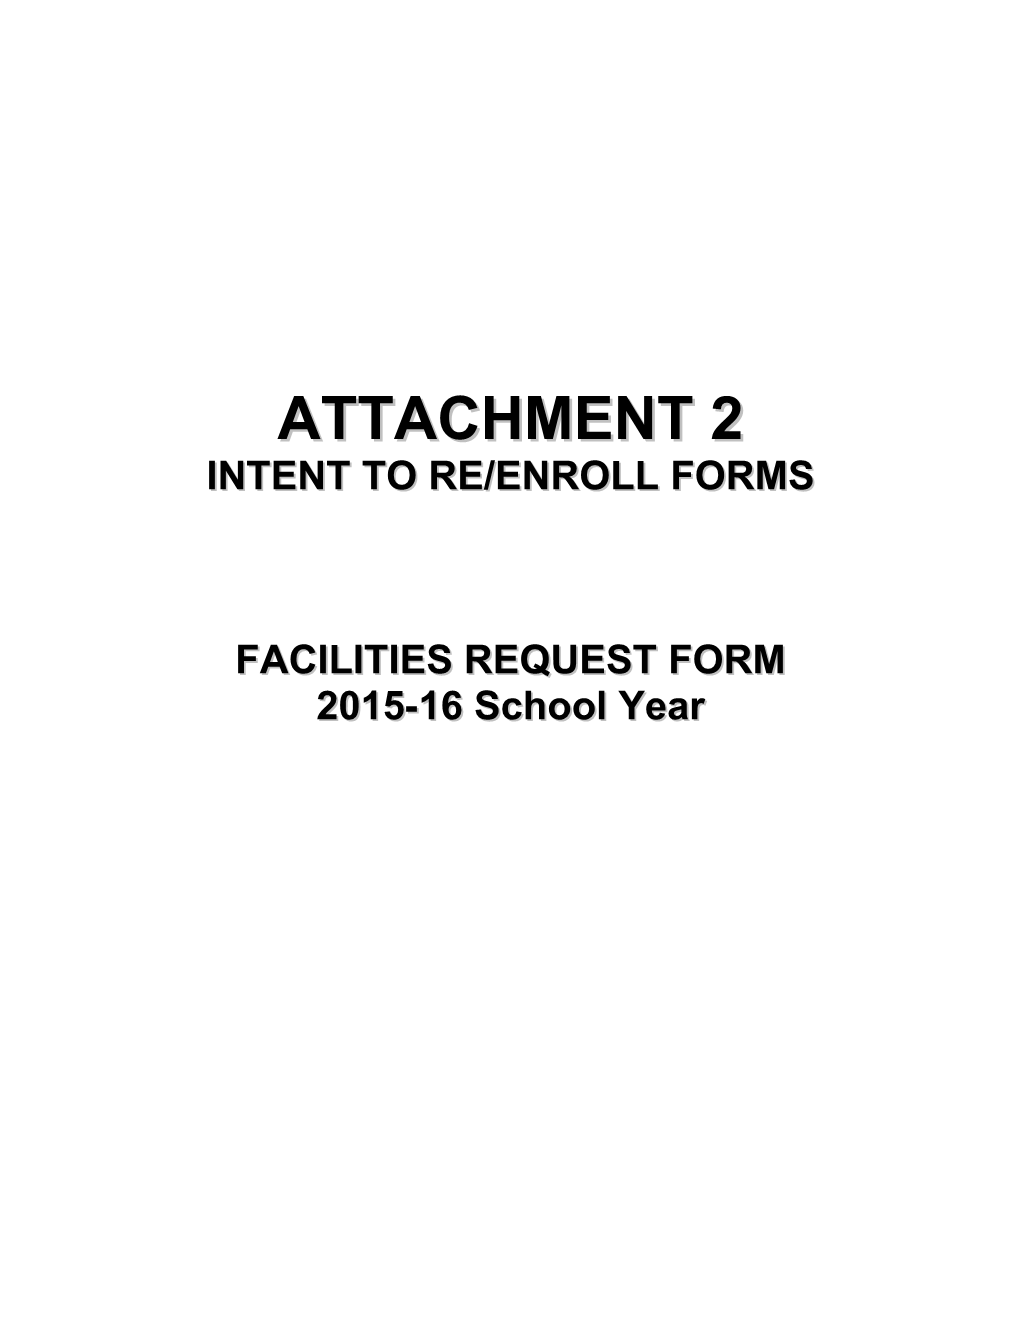 Intent to Re/Enroll Forms